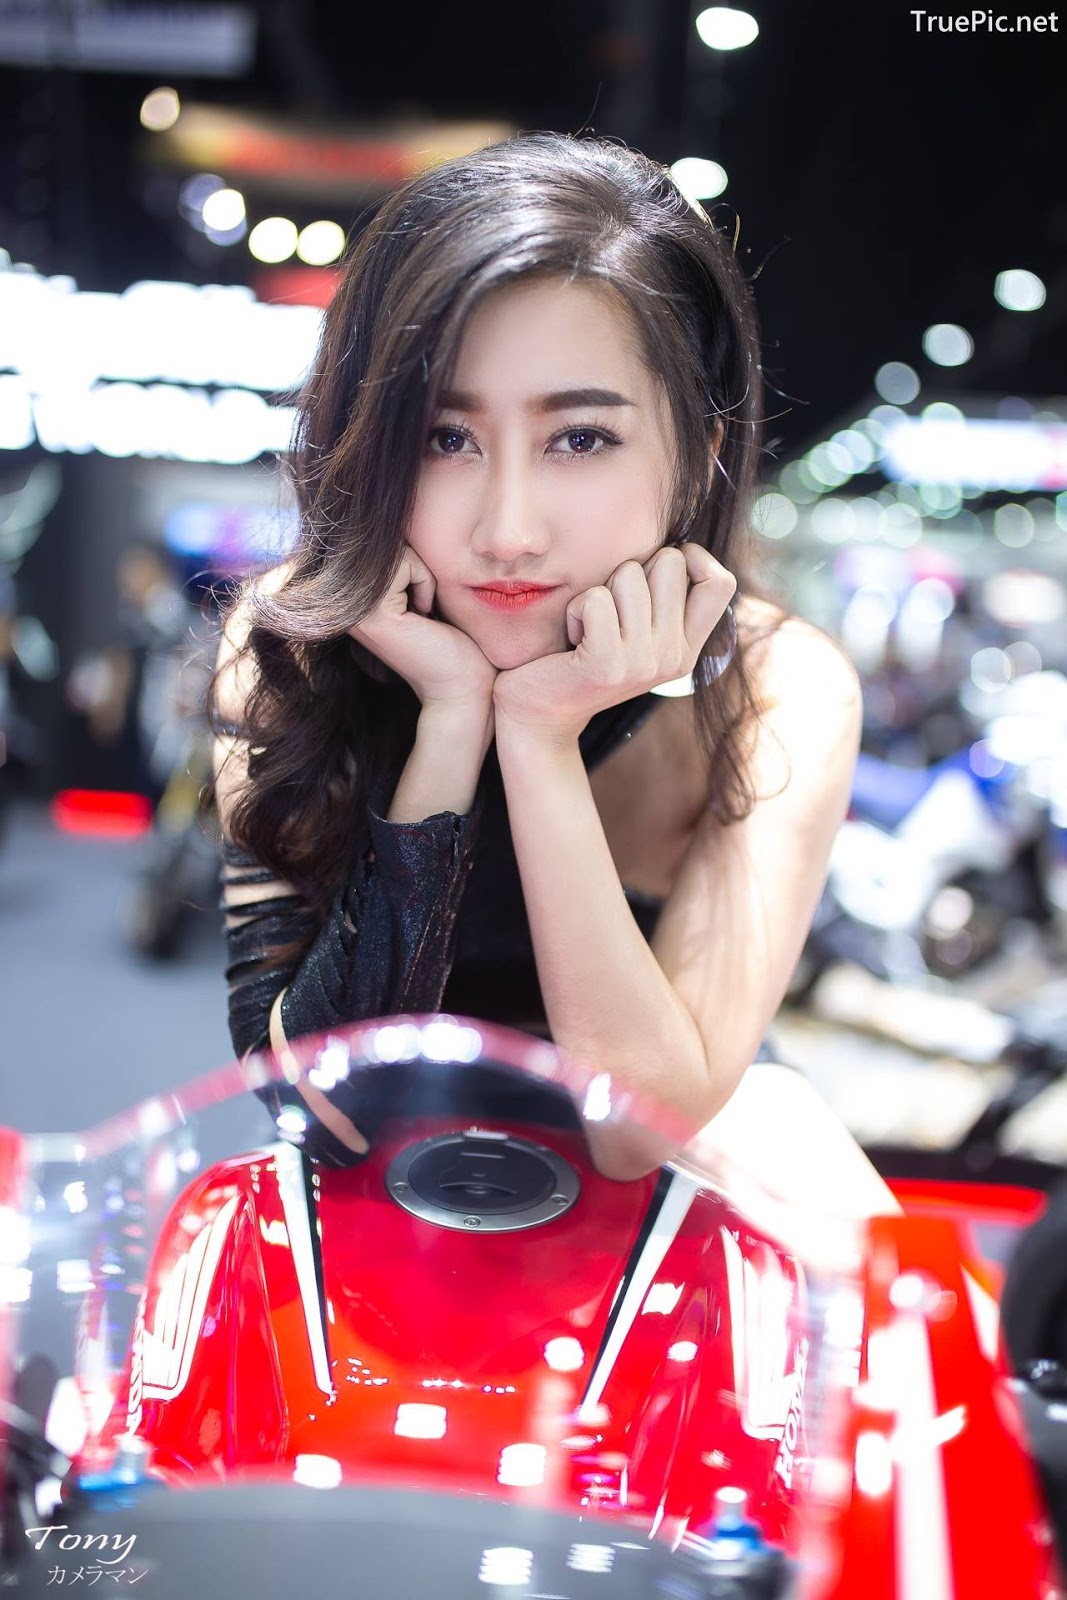 Image-Thailand-Hot-Model-Thai-Racing-Girl-At-Motor-Expo-2018-TruePic.net- Picture-29